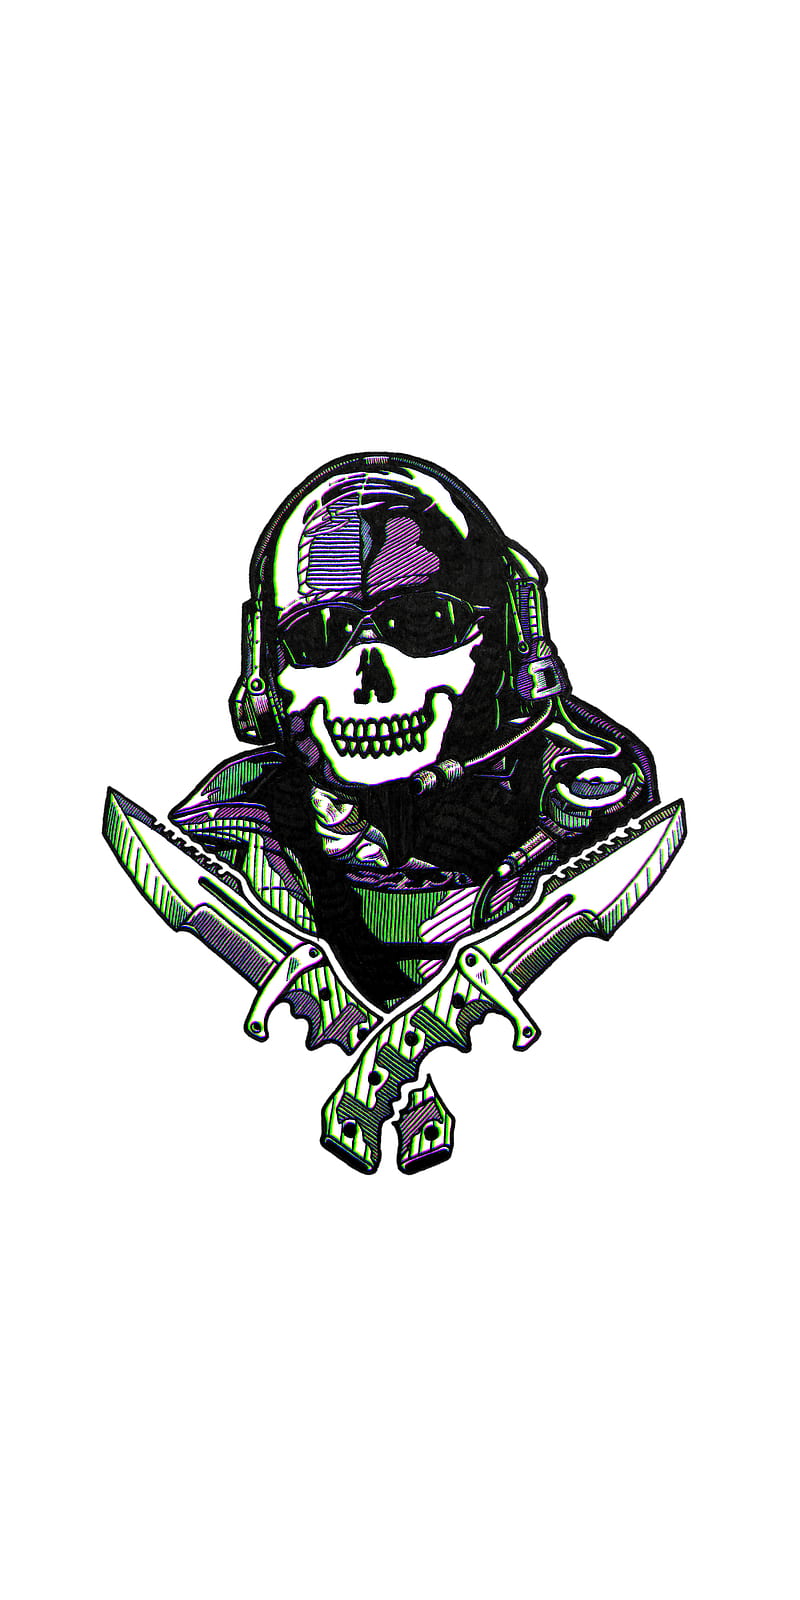 ghost-logo-call-duty-military-hd-mobile-wallpaper-peakpx